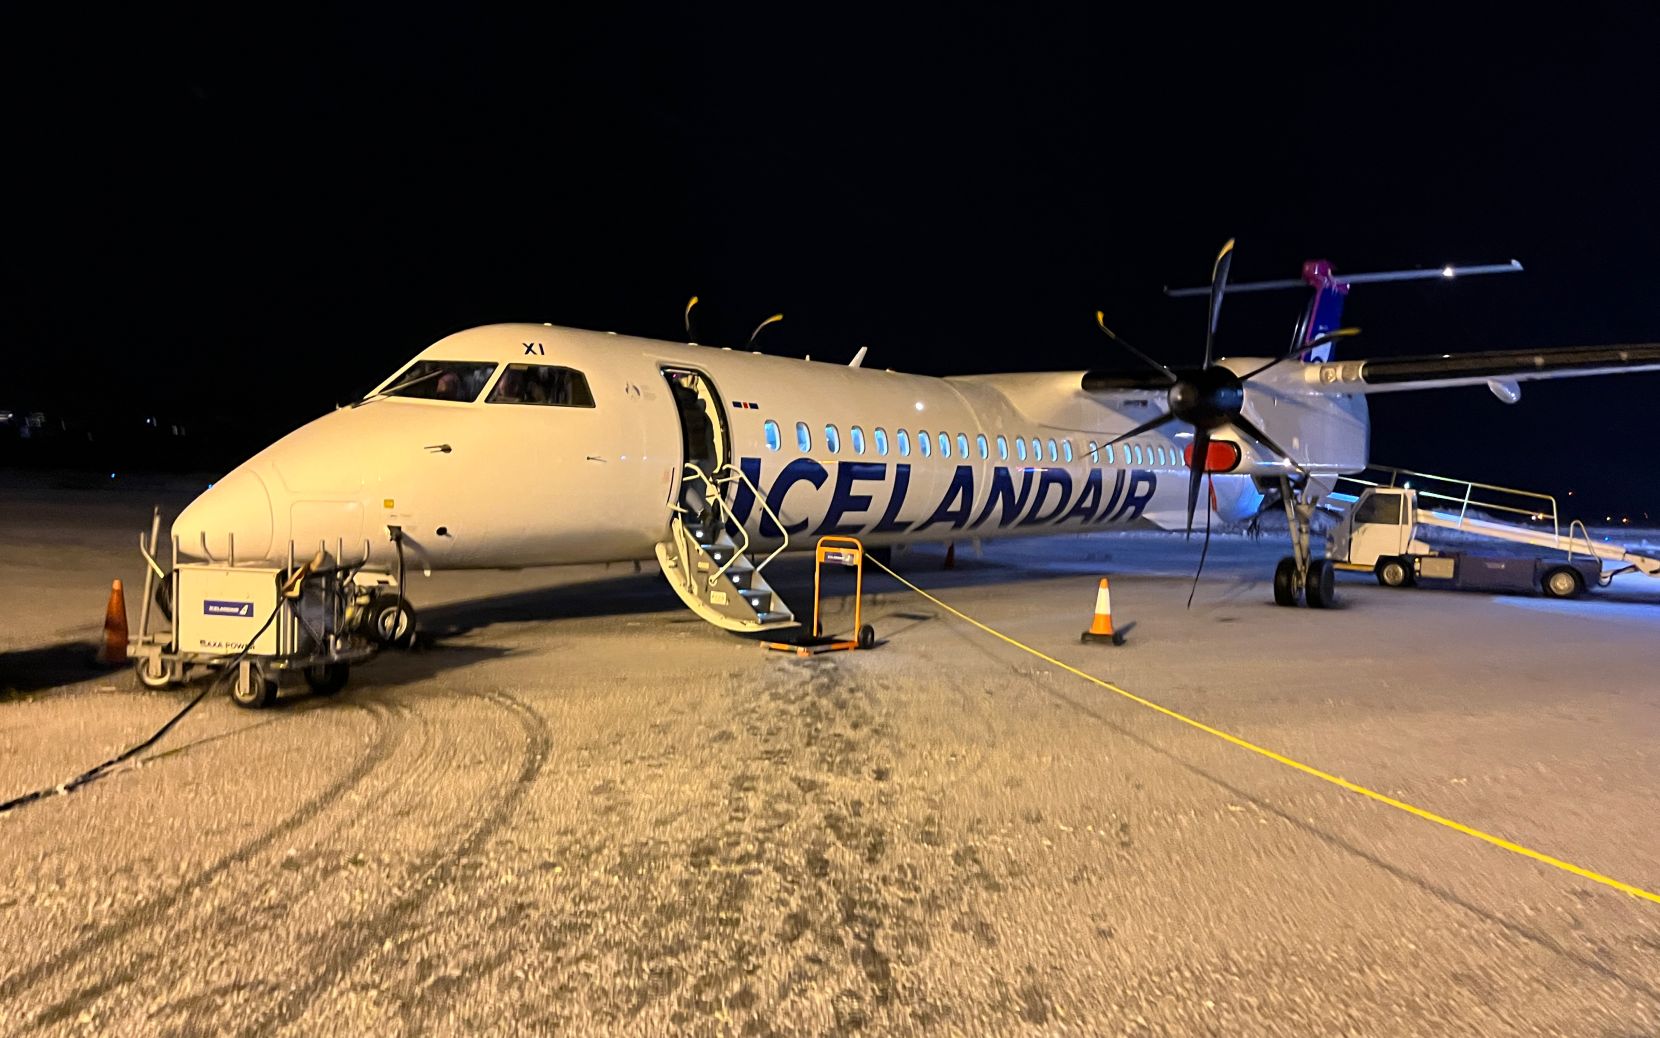 Icelandair DHC-8-400 parked on a snowy ramp.